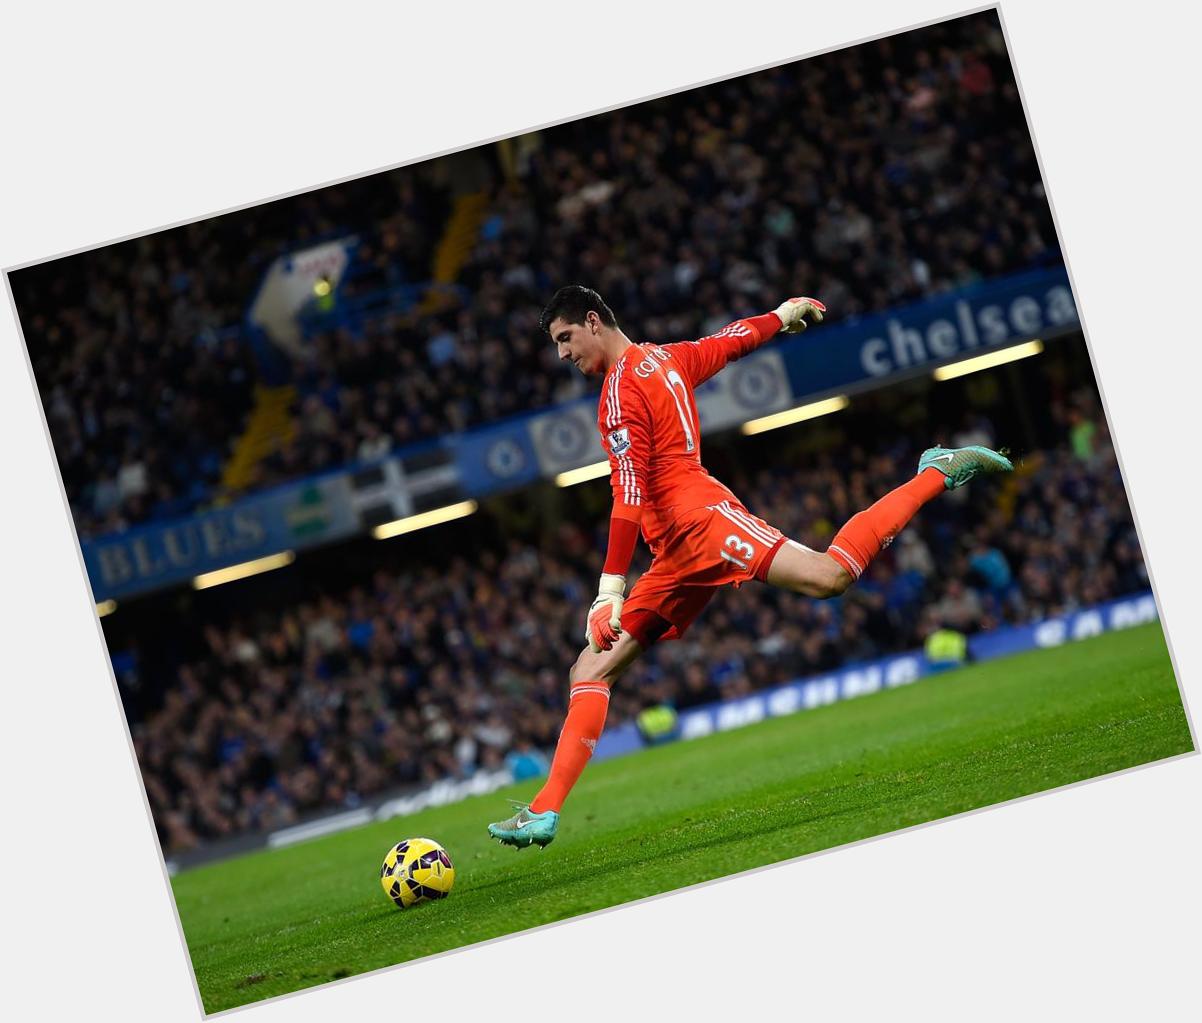 A very Happy Birthday to the Premier League Champion & our Future No.1 Thibaut Courtois.  